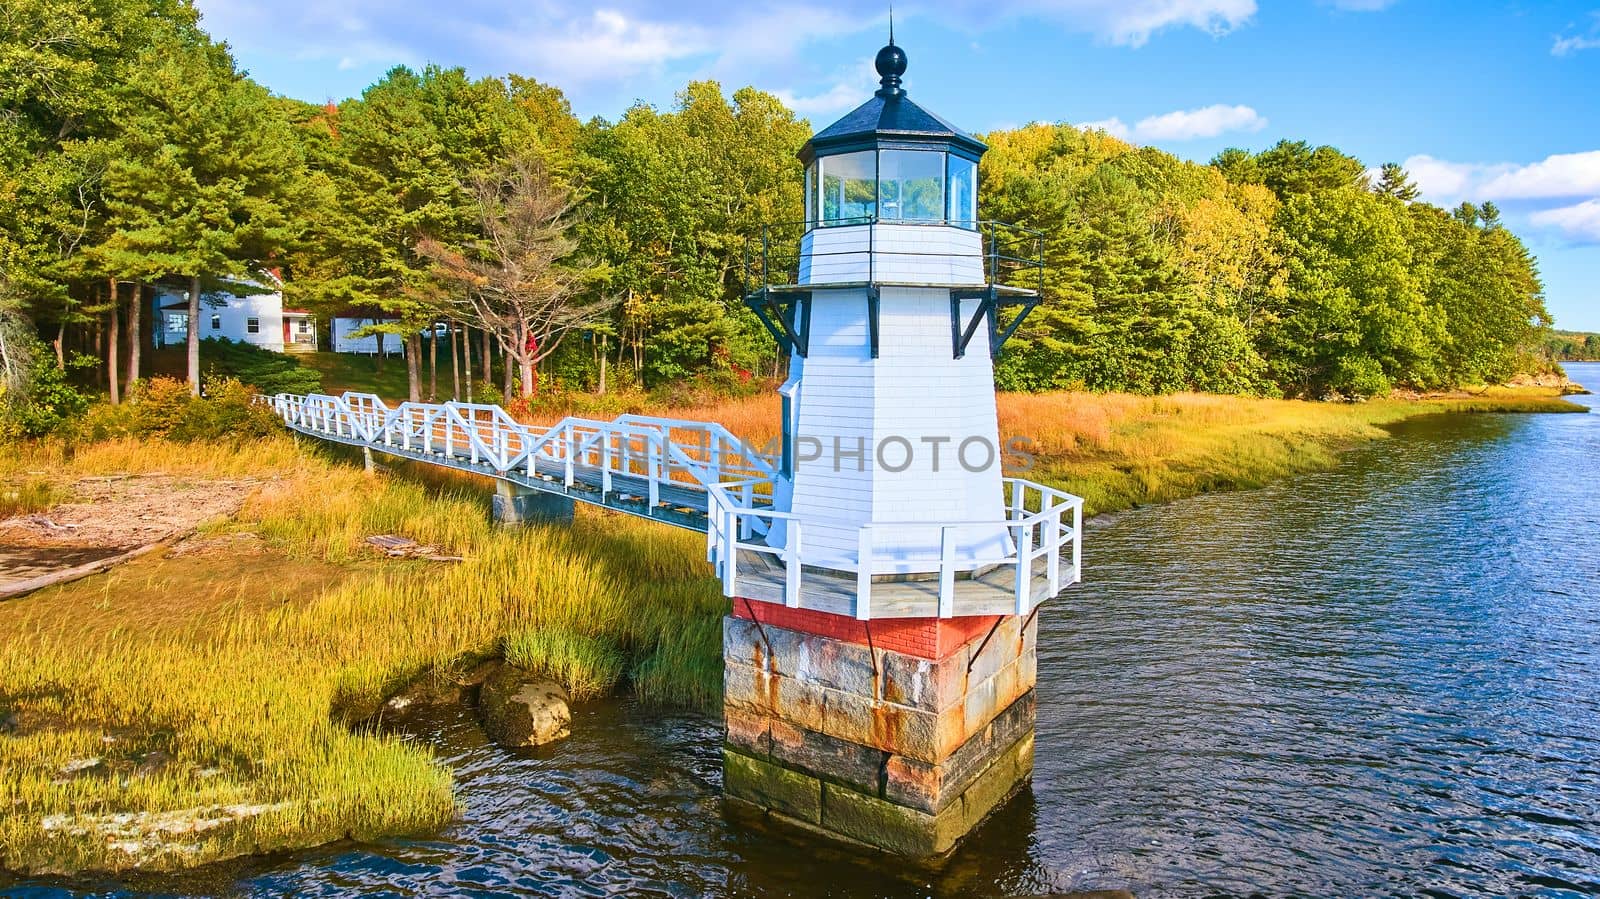 Adorable tiny lighthouse on Maine coast with walkway and fall foliage by njproductions